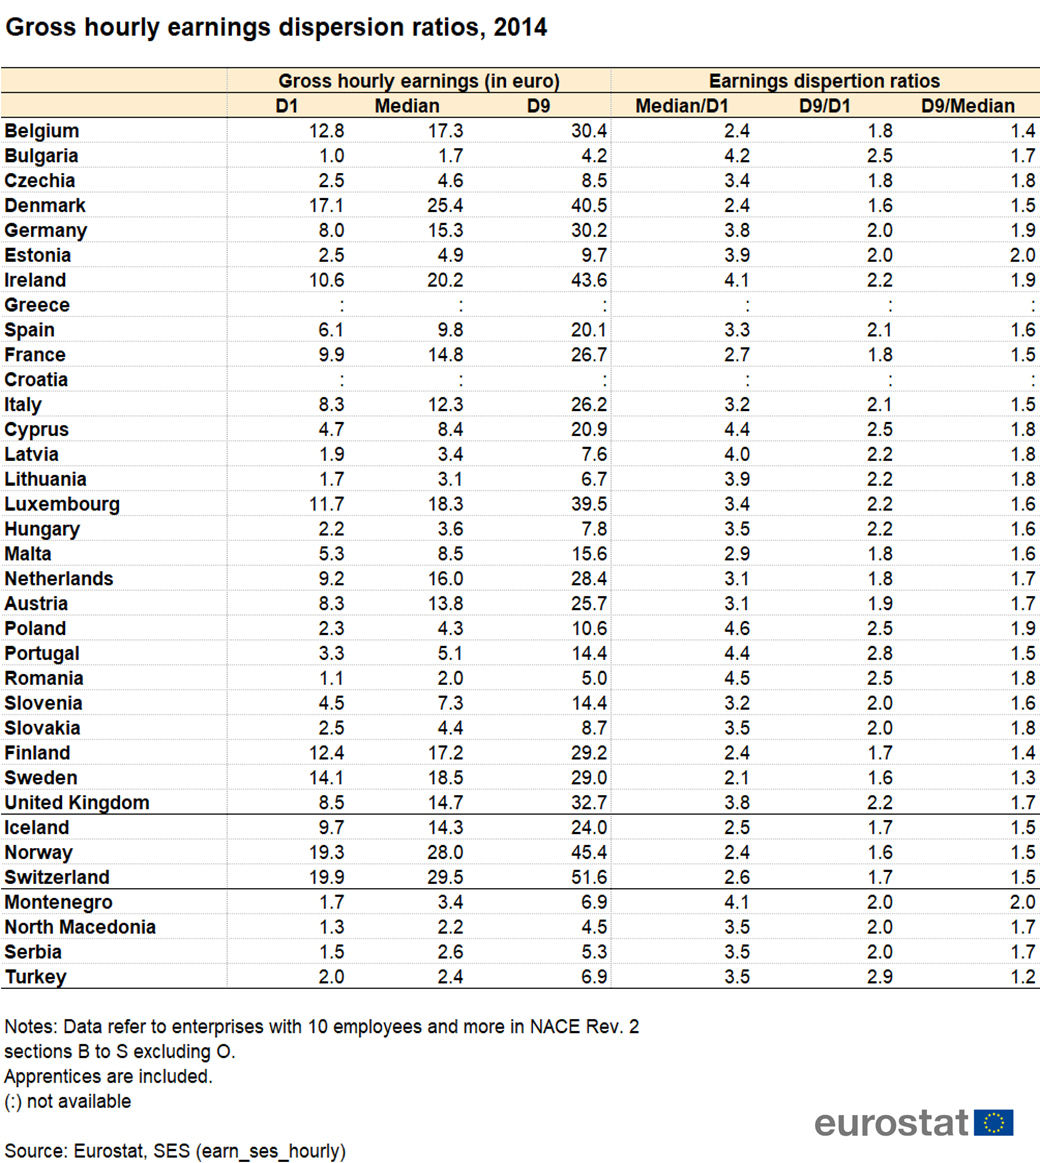 Table_2_Gross_hourly_earnings_dispersion_ratios%2C_2014.png